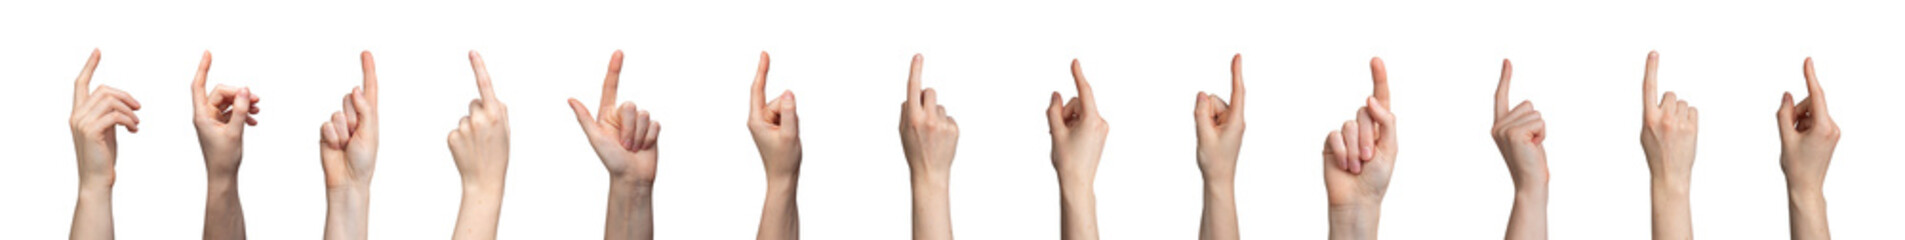 Fingers clicking, touching, pointing up, showing gestures, signs, big hand set isolated on white, transparent png